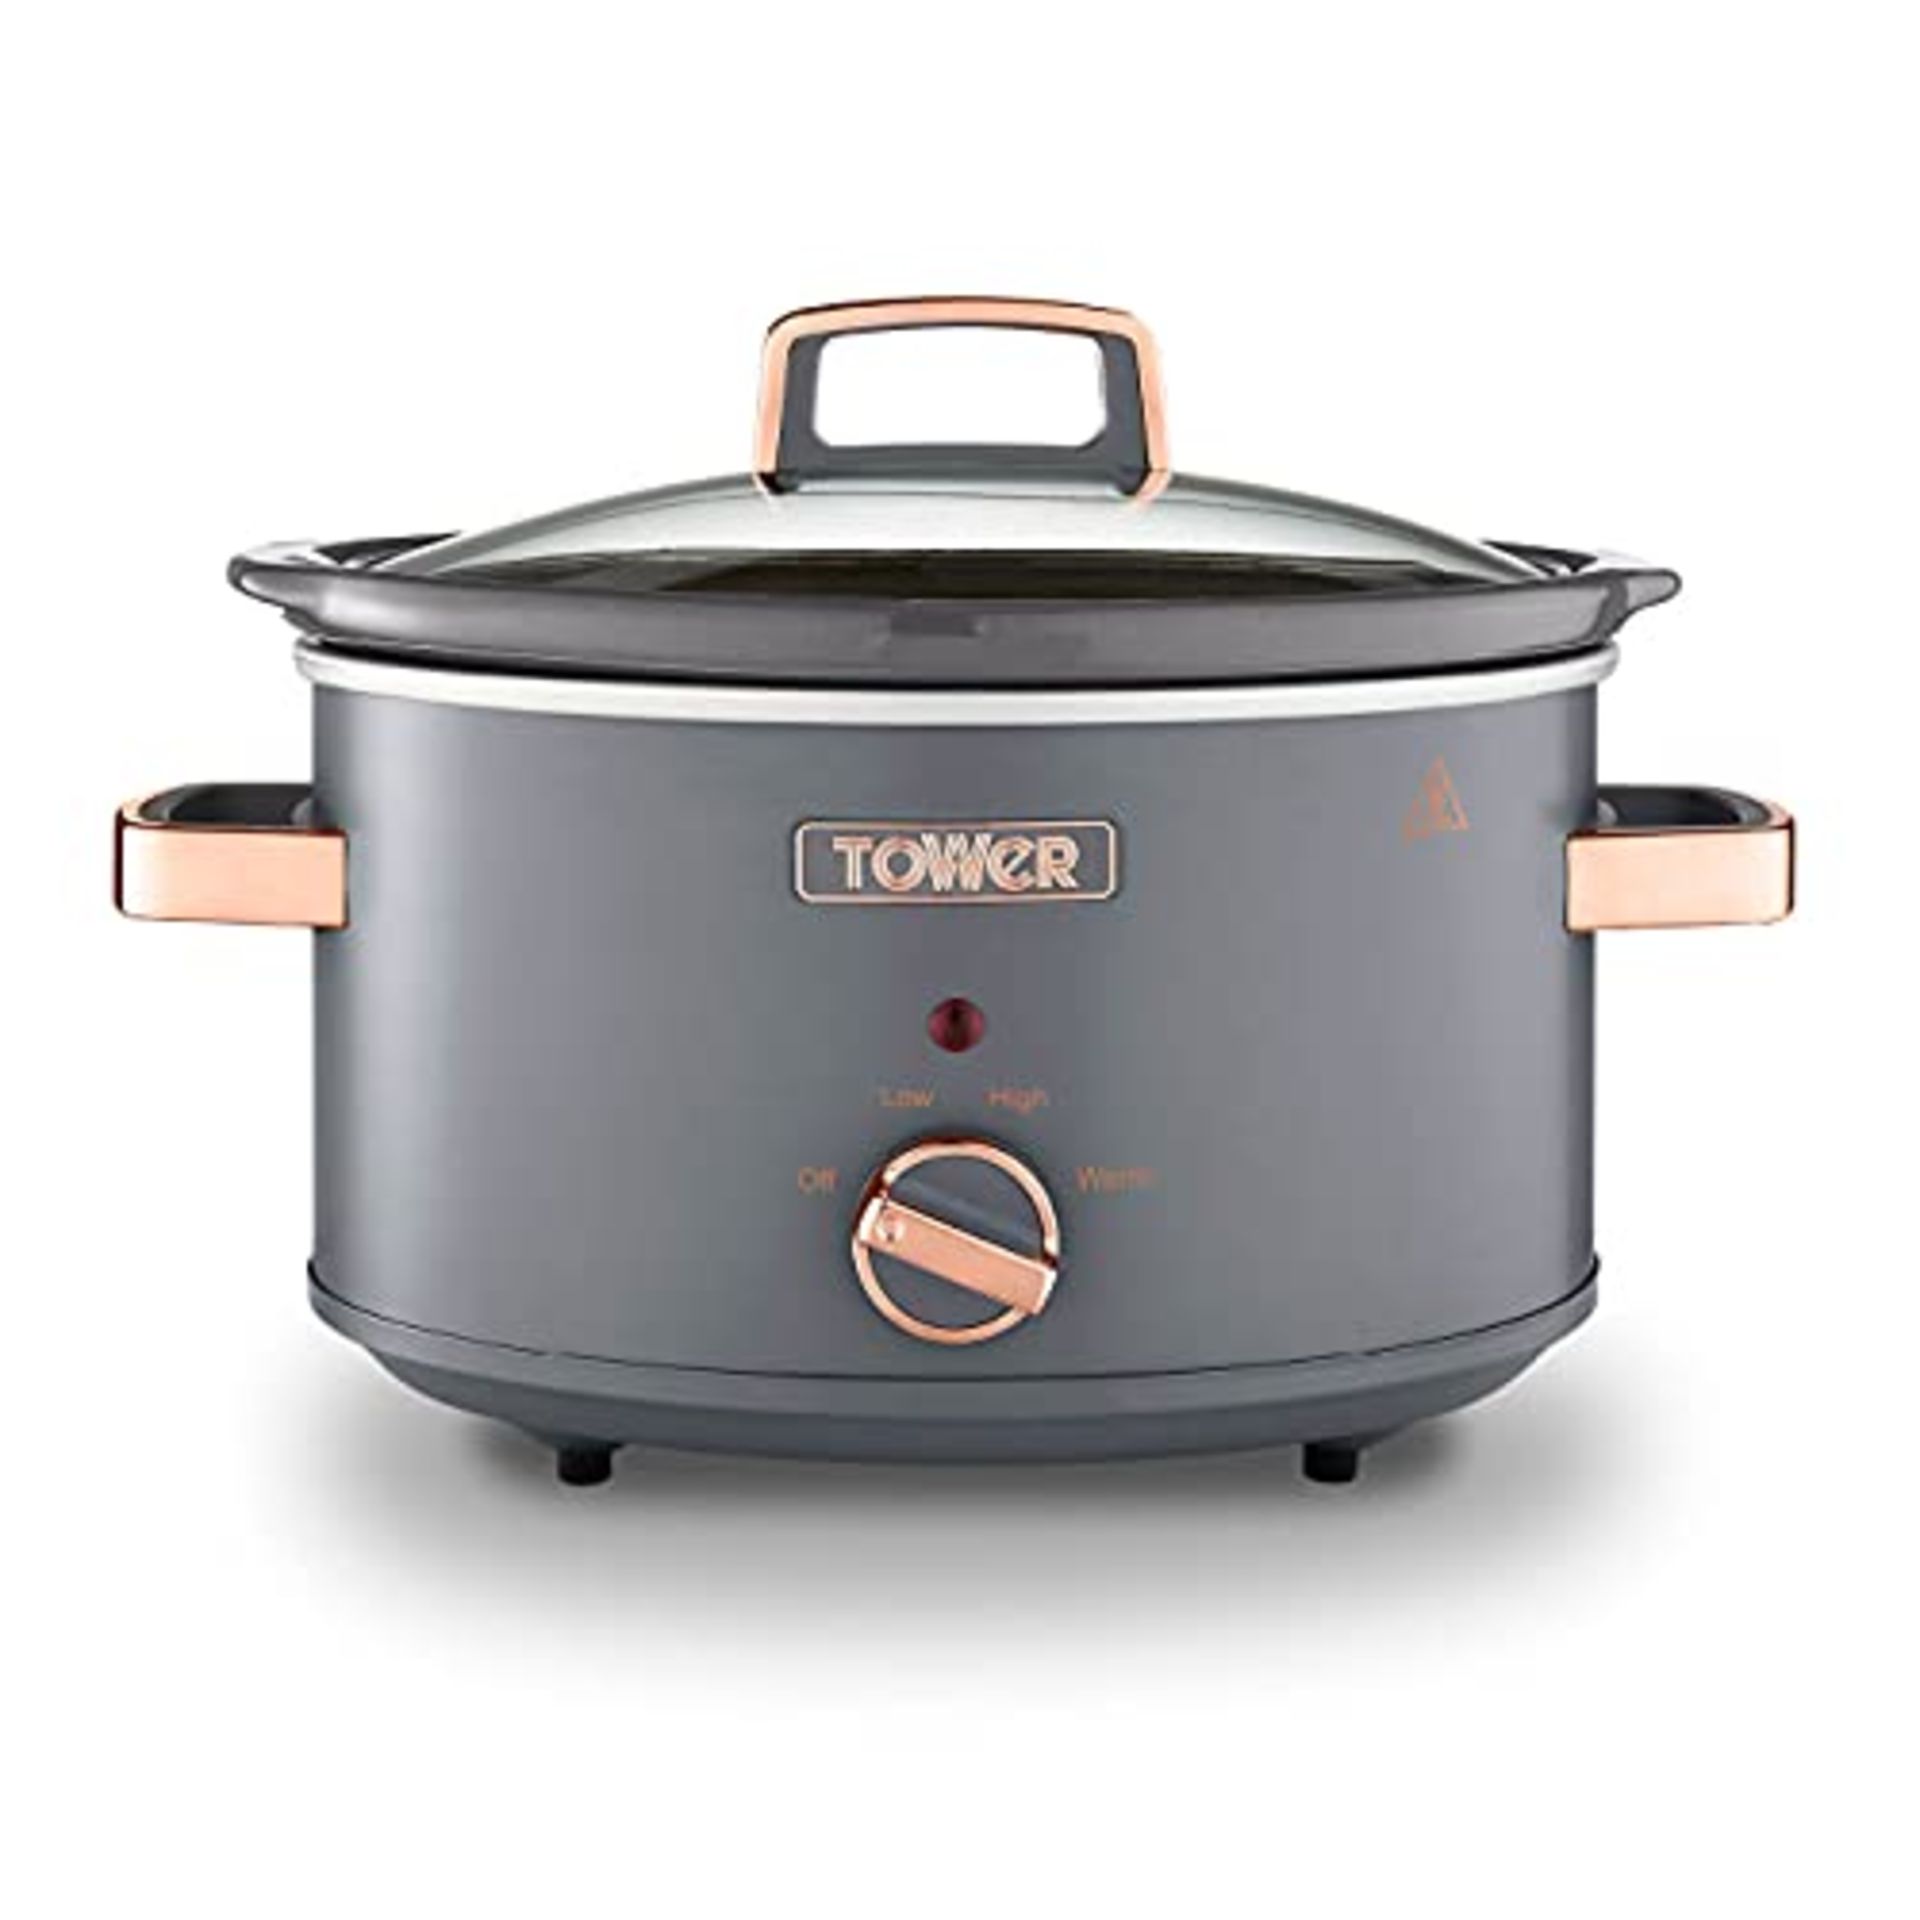 Tower T16042GRY Cavaletto 3.5 Litre Slow Cooker with 3 Heat Settings, Removable Pot an